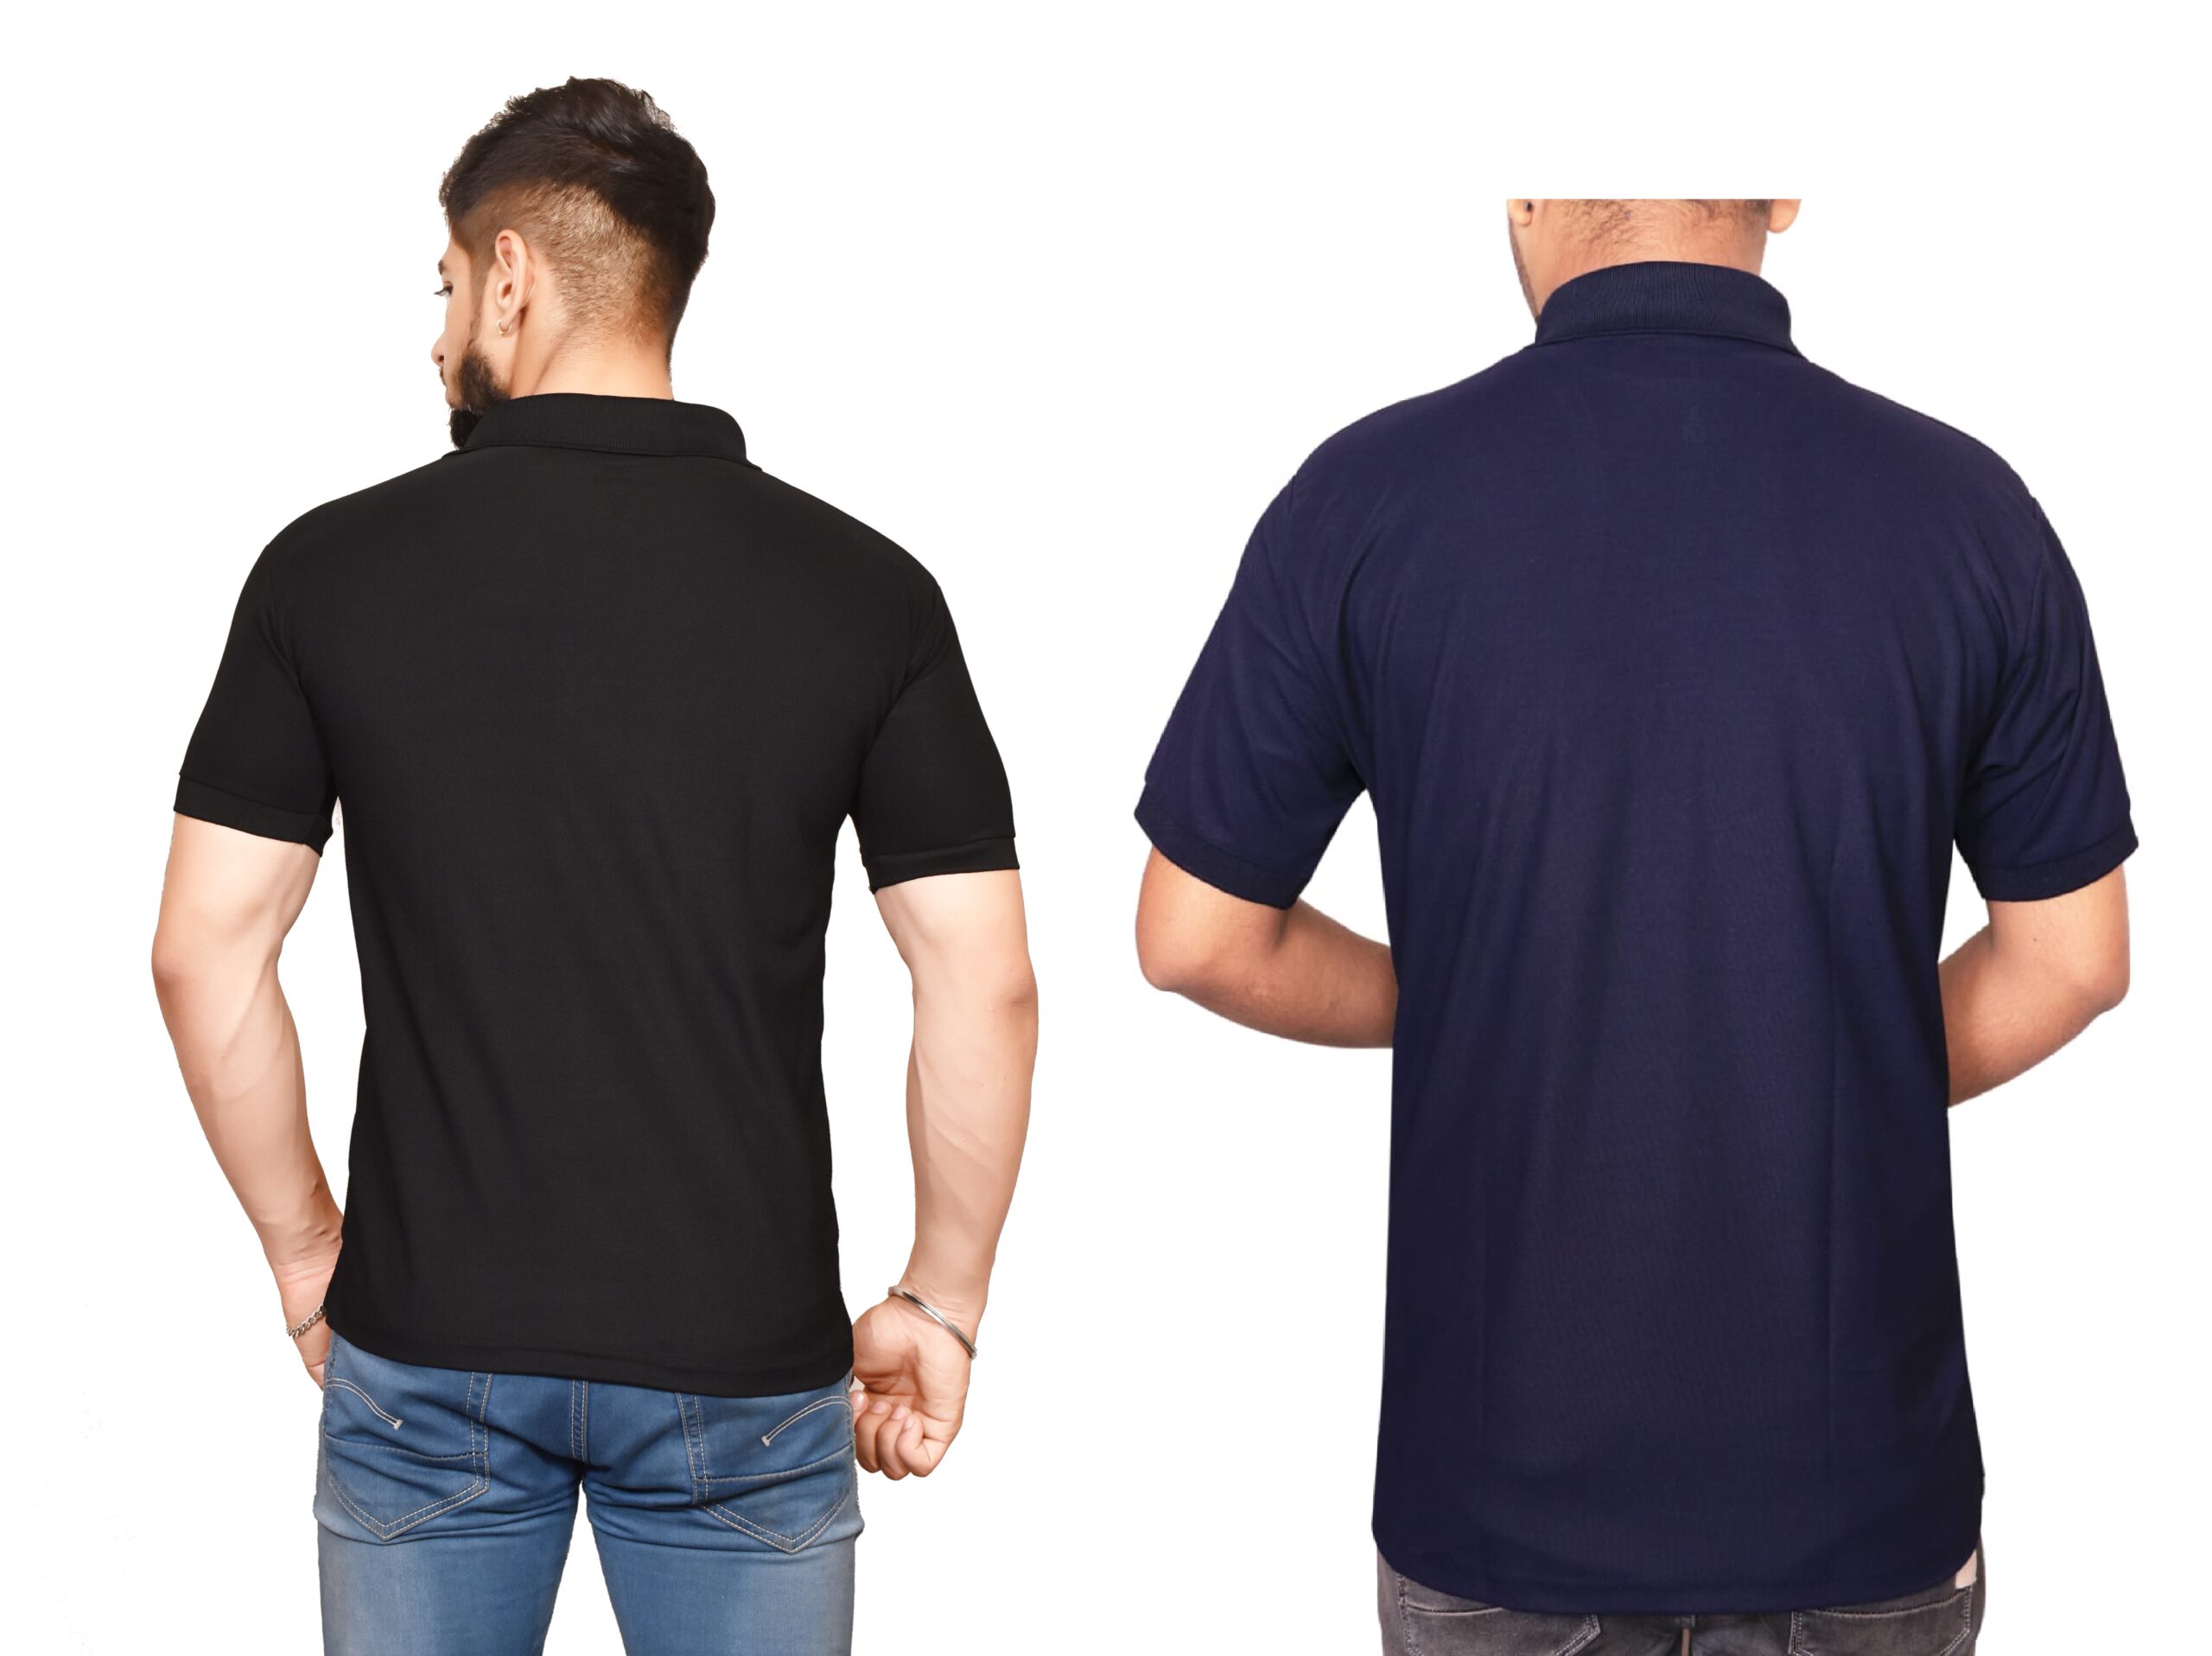 comba black and navy blue back side